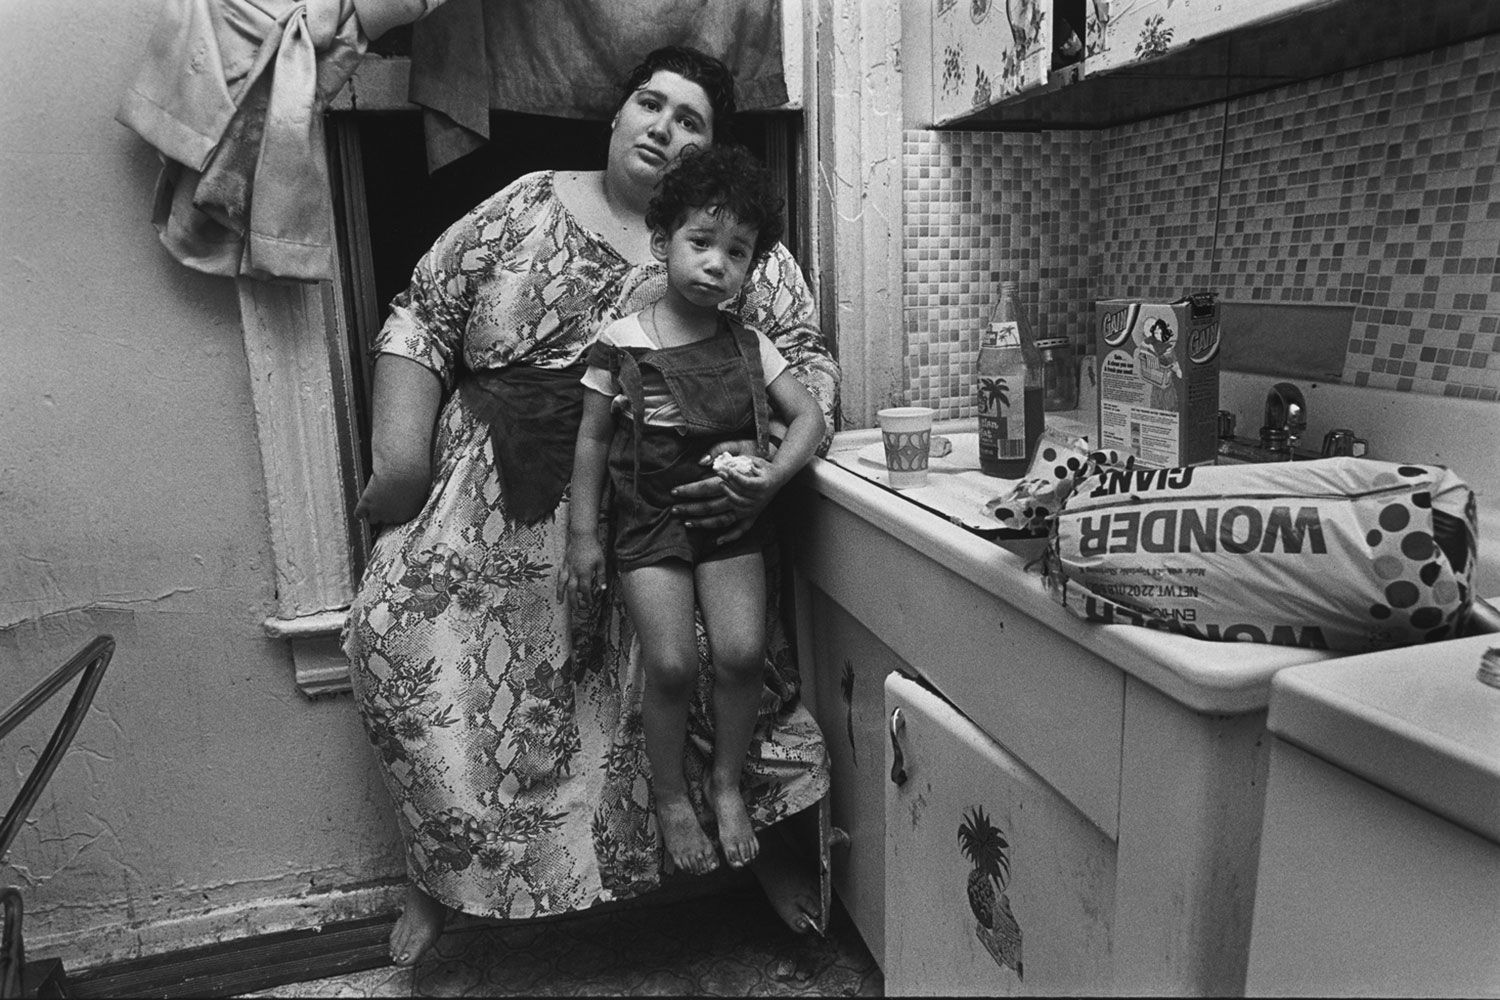 Jeanette's neighbors in their kitchen, Brooklyn, New York, 1979.